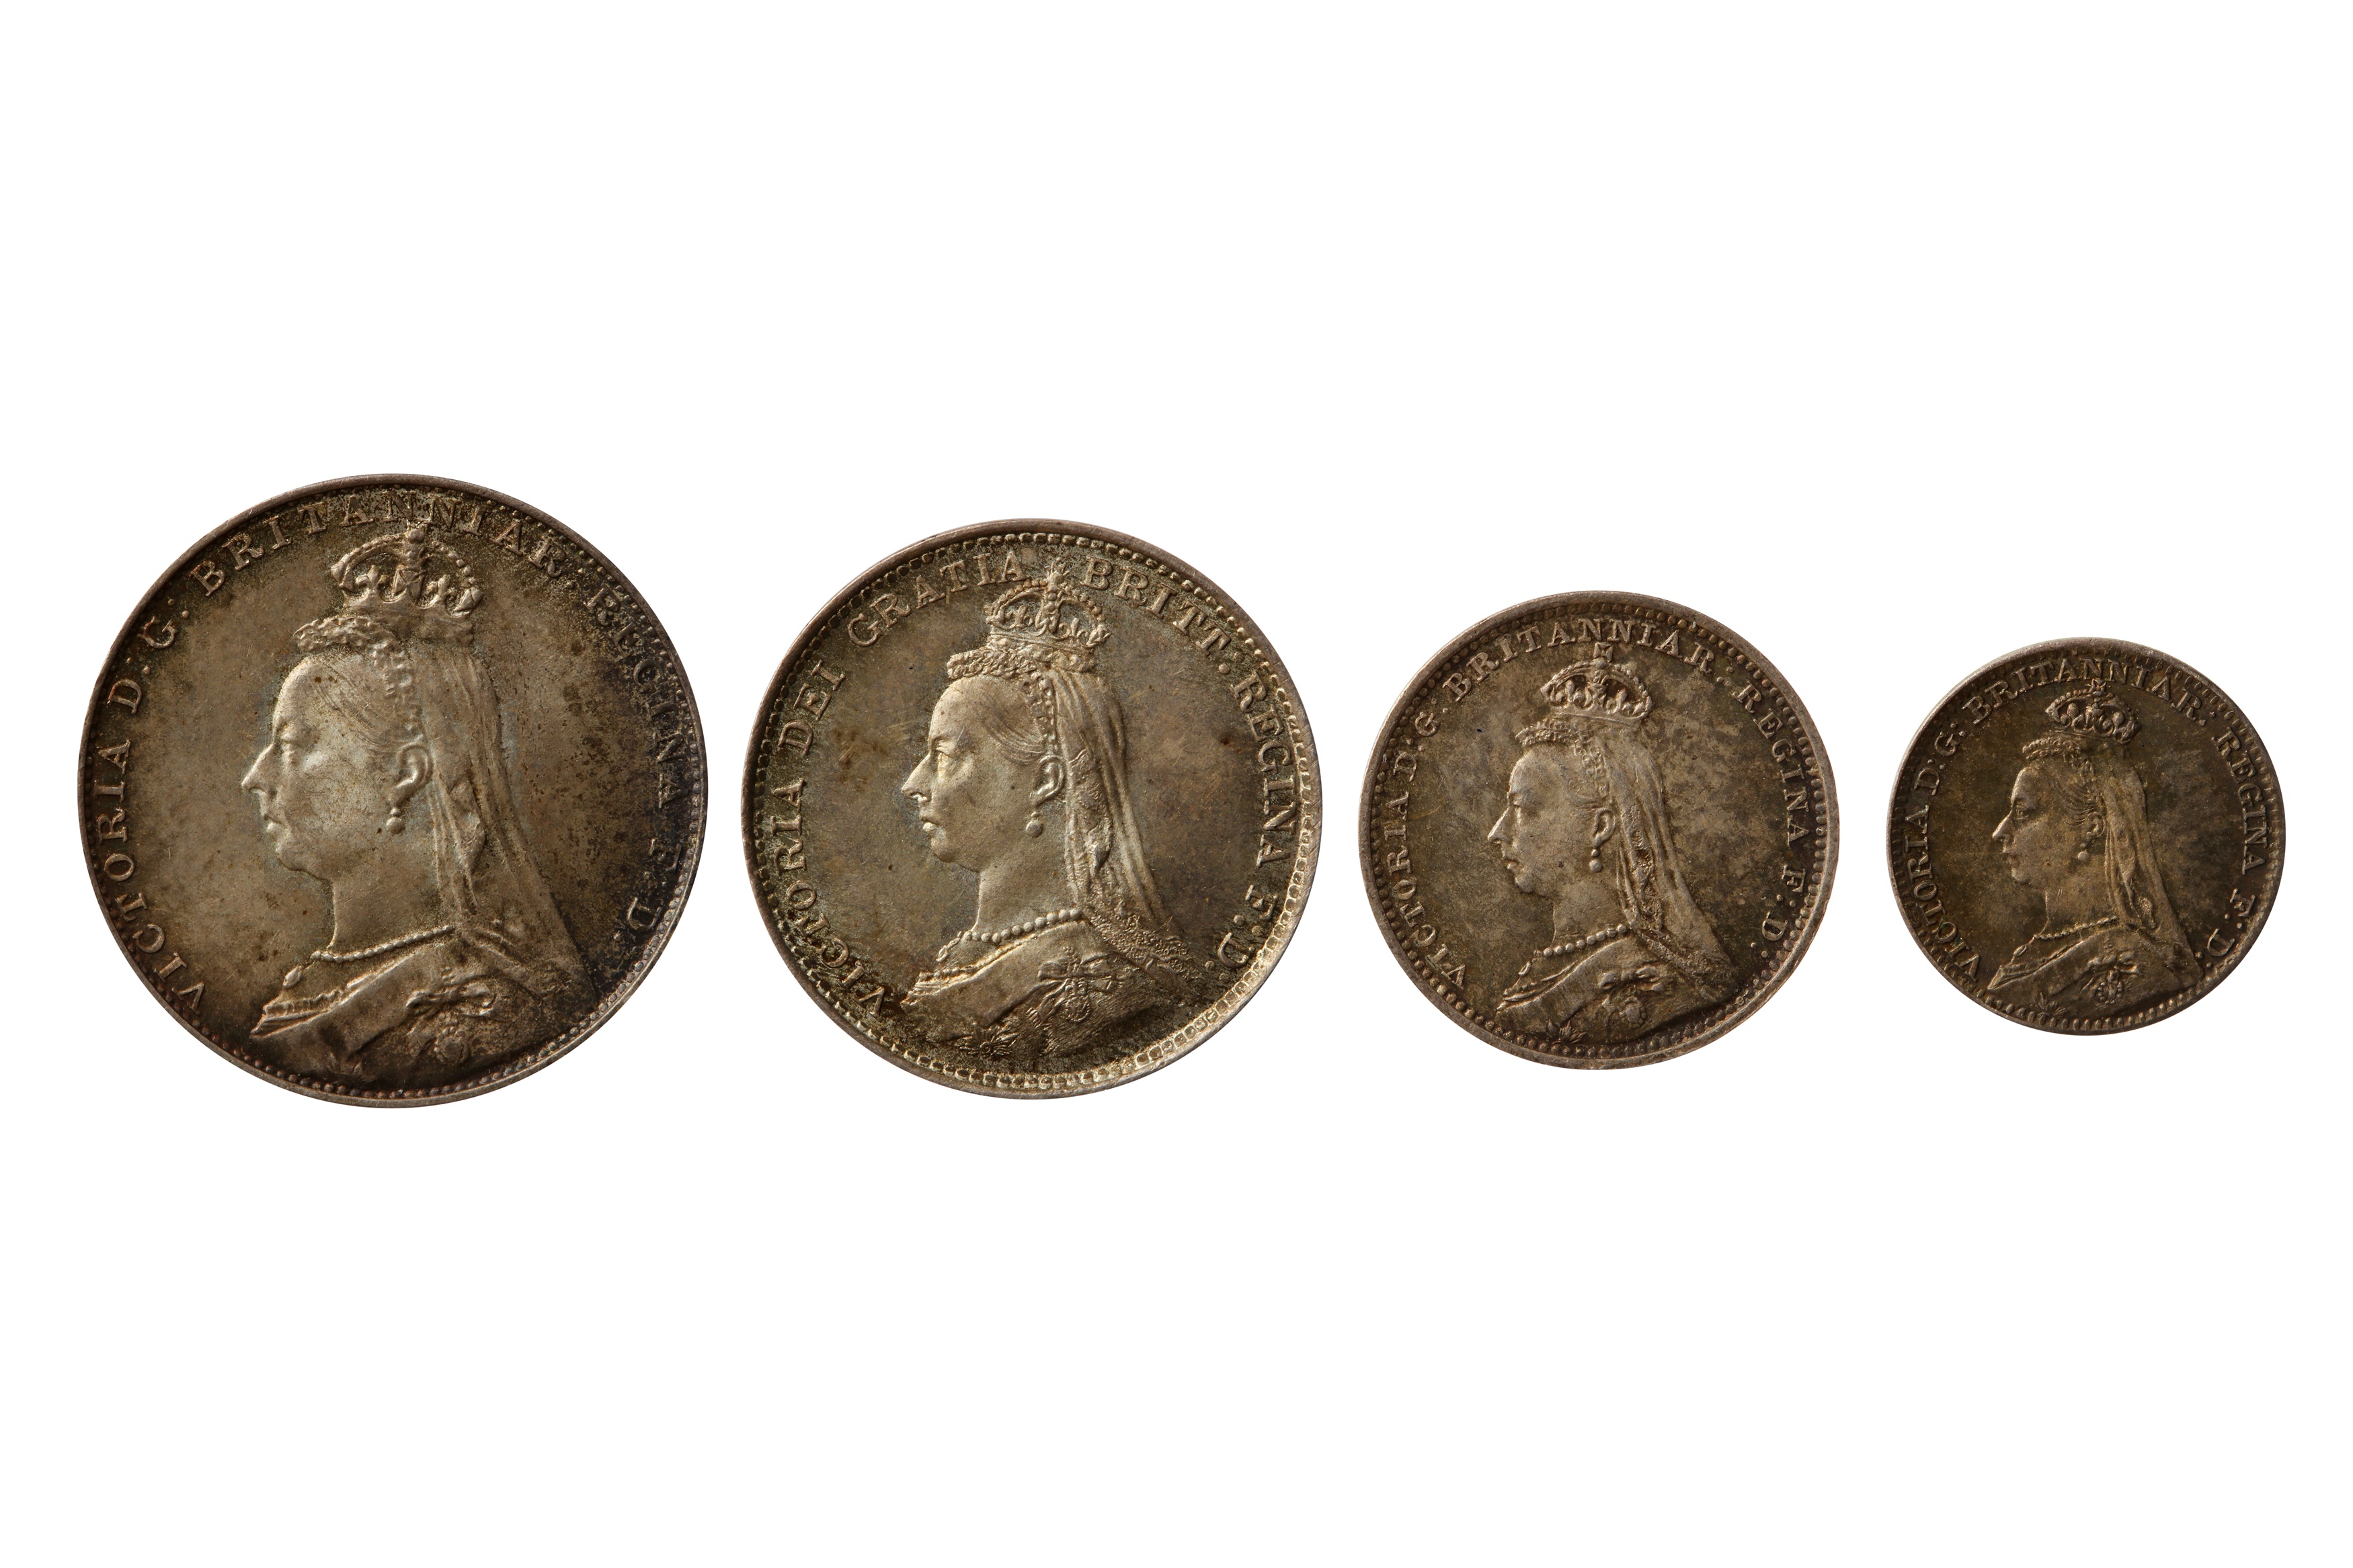 VICTORIA (1837 - 1901), 4X MAUNDY COINS